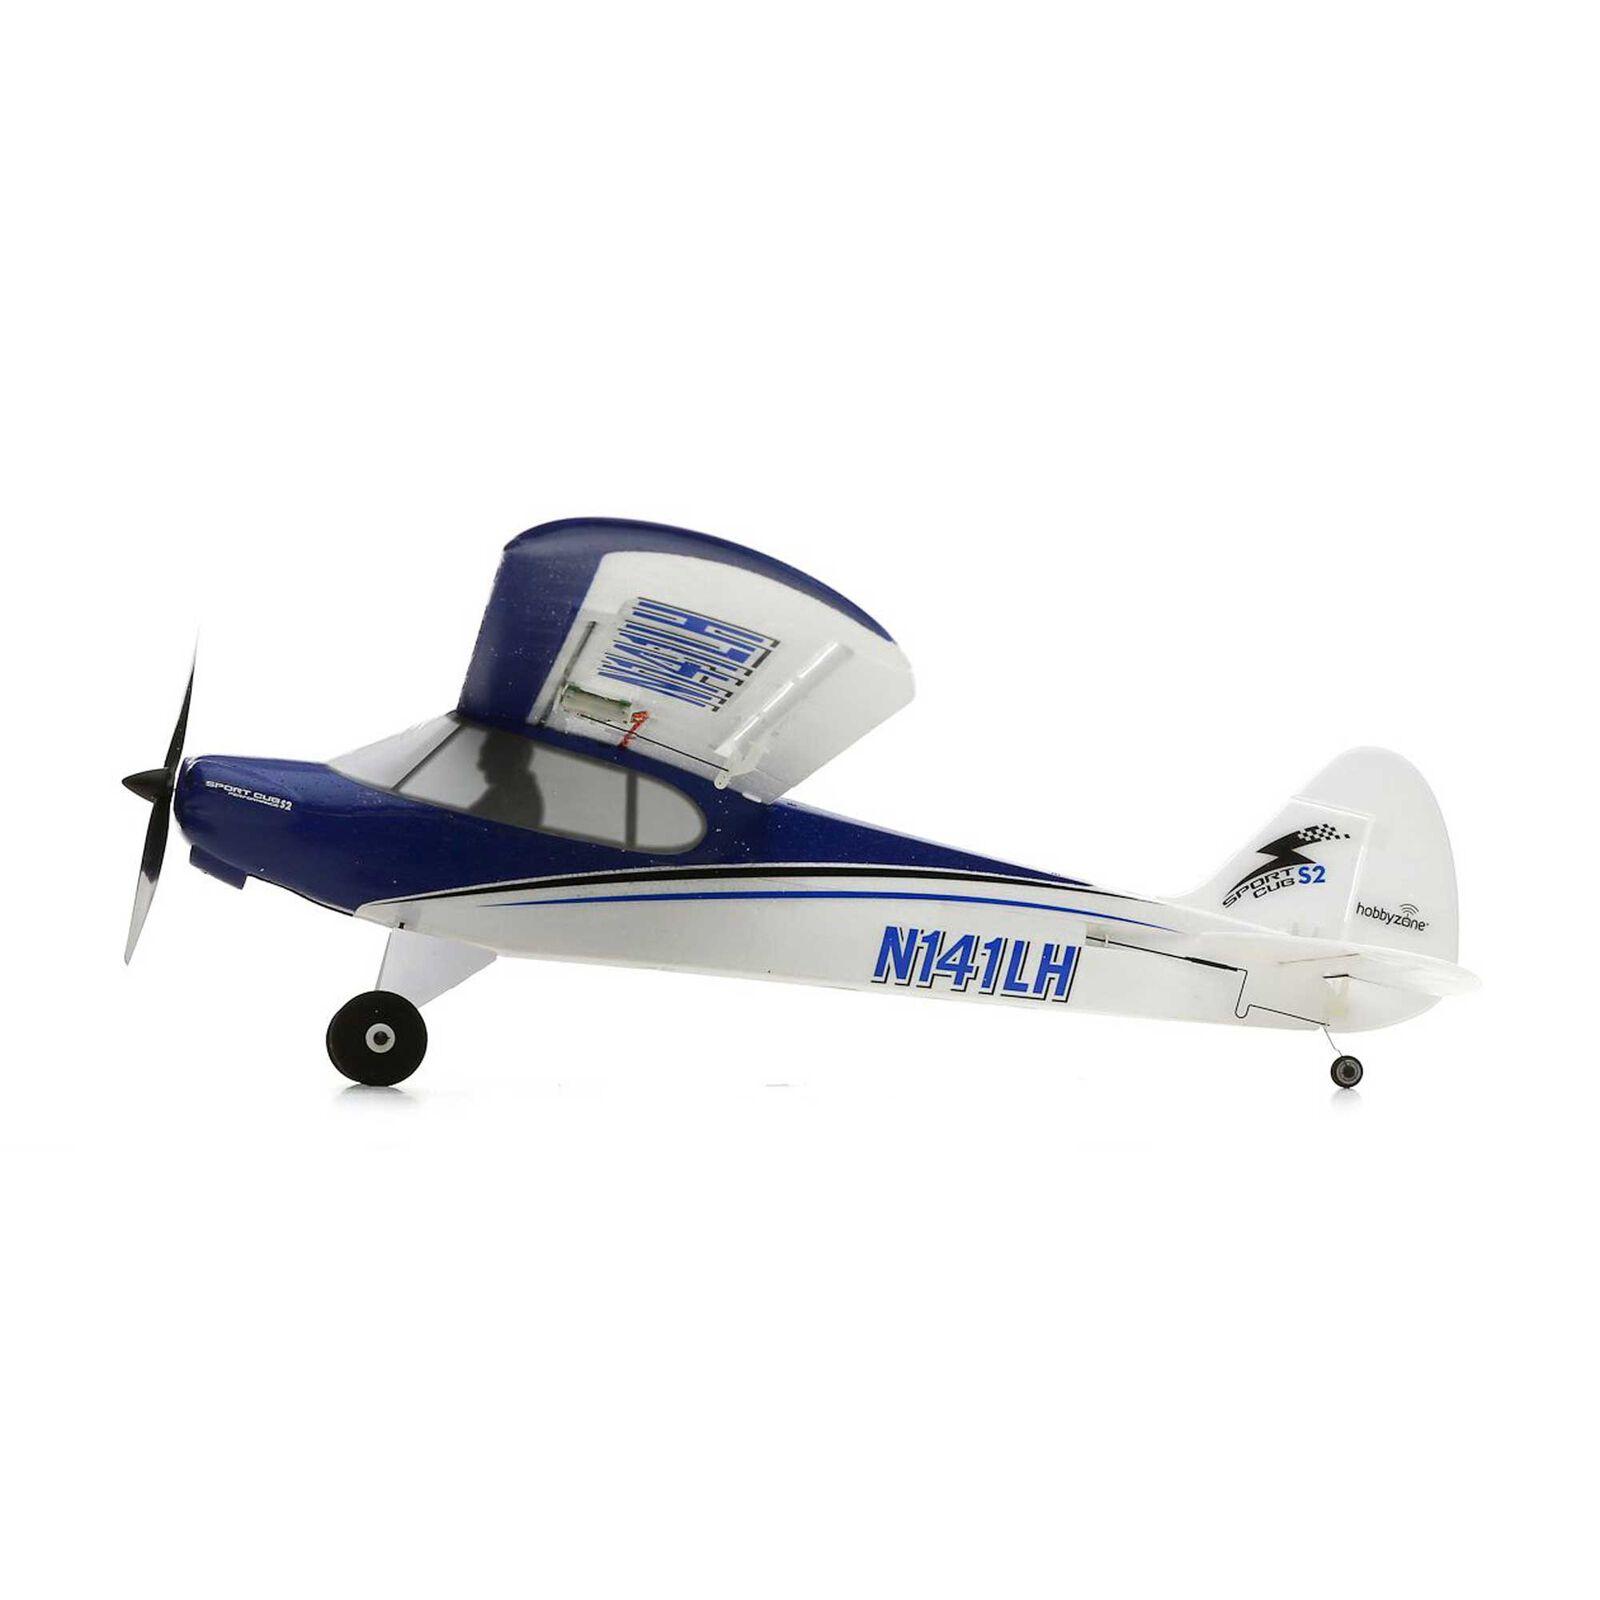 Rc Sport Cub S2:  Affordable and customizable options for the RC Sport Cub S2.